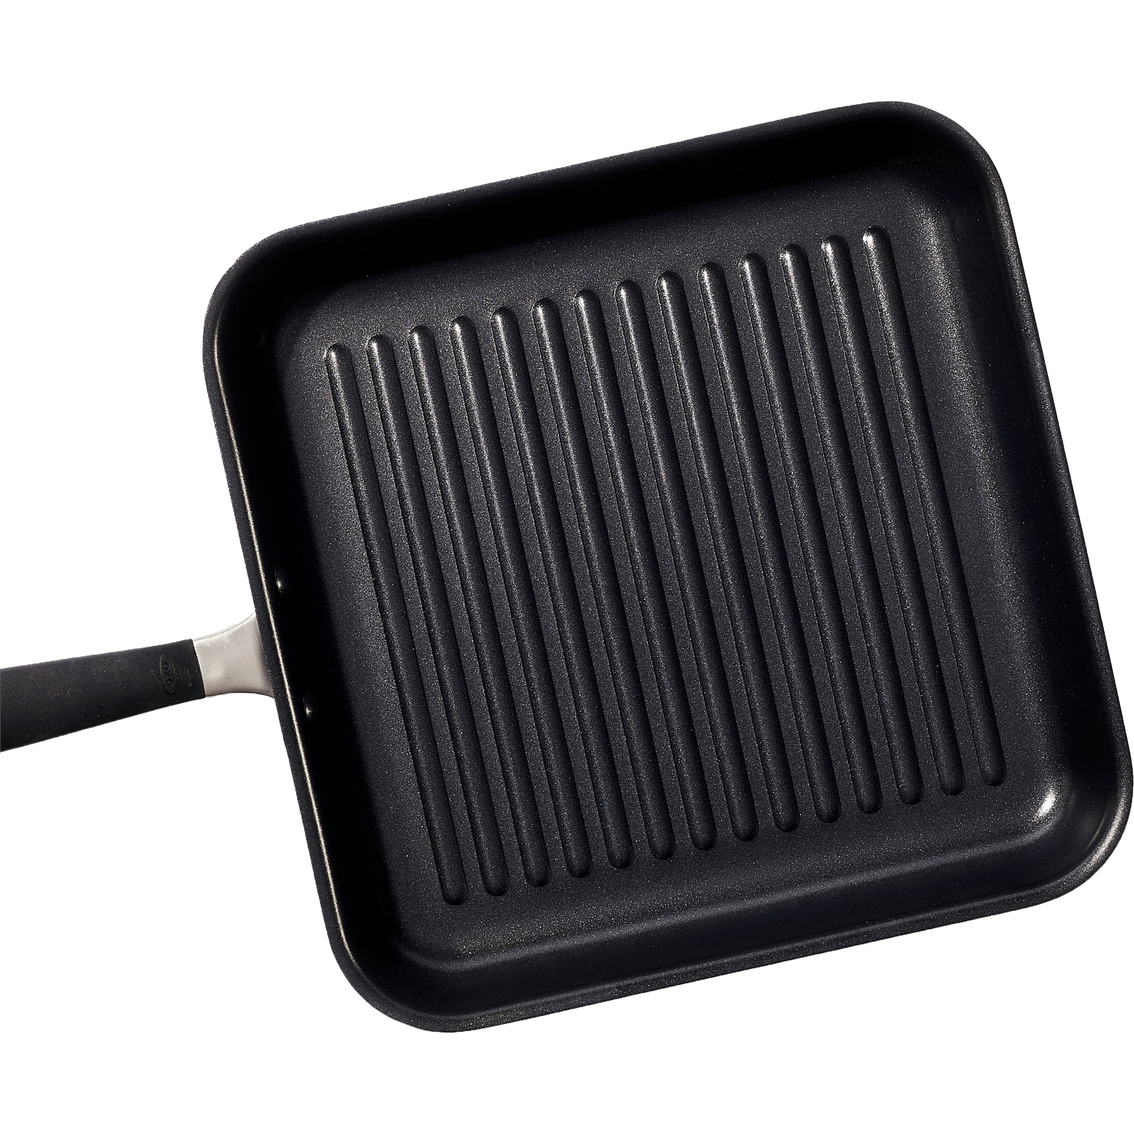 Oxo Good Grips Non Stick 11 in. Grill Pan - Image 3 of 3